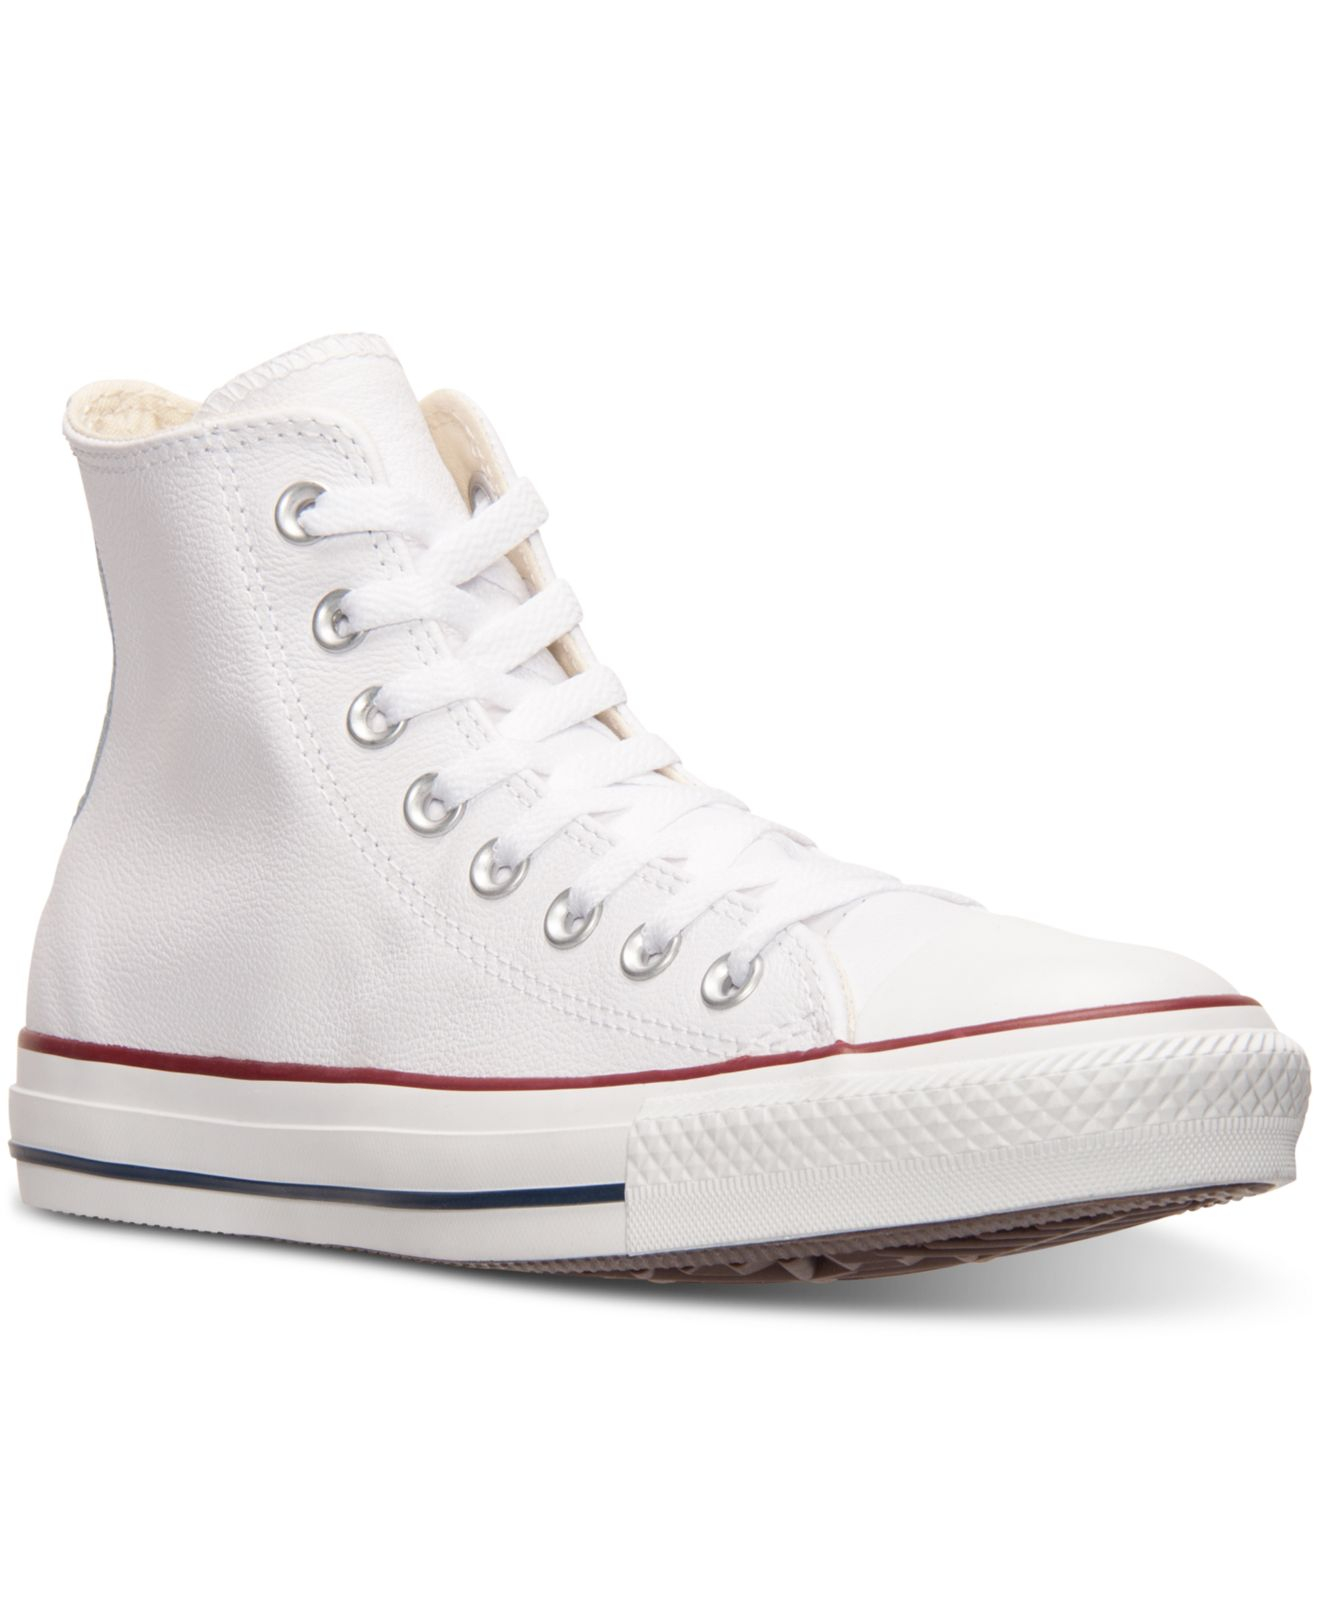 Lyst Converse Men S Chuck Taylor High Leather Casual Sneakers From